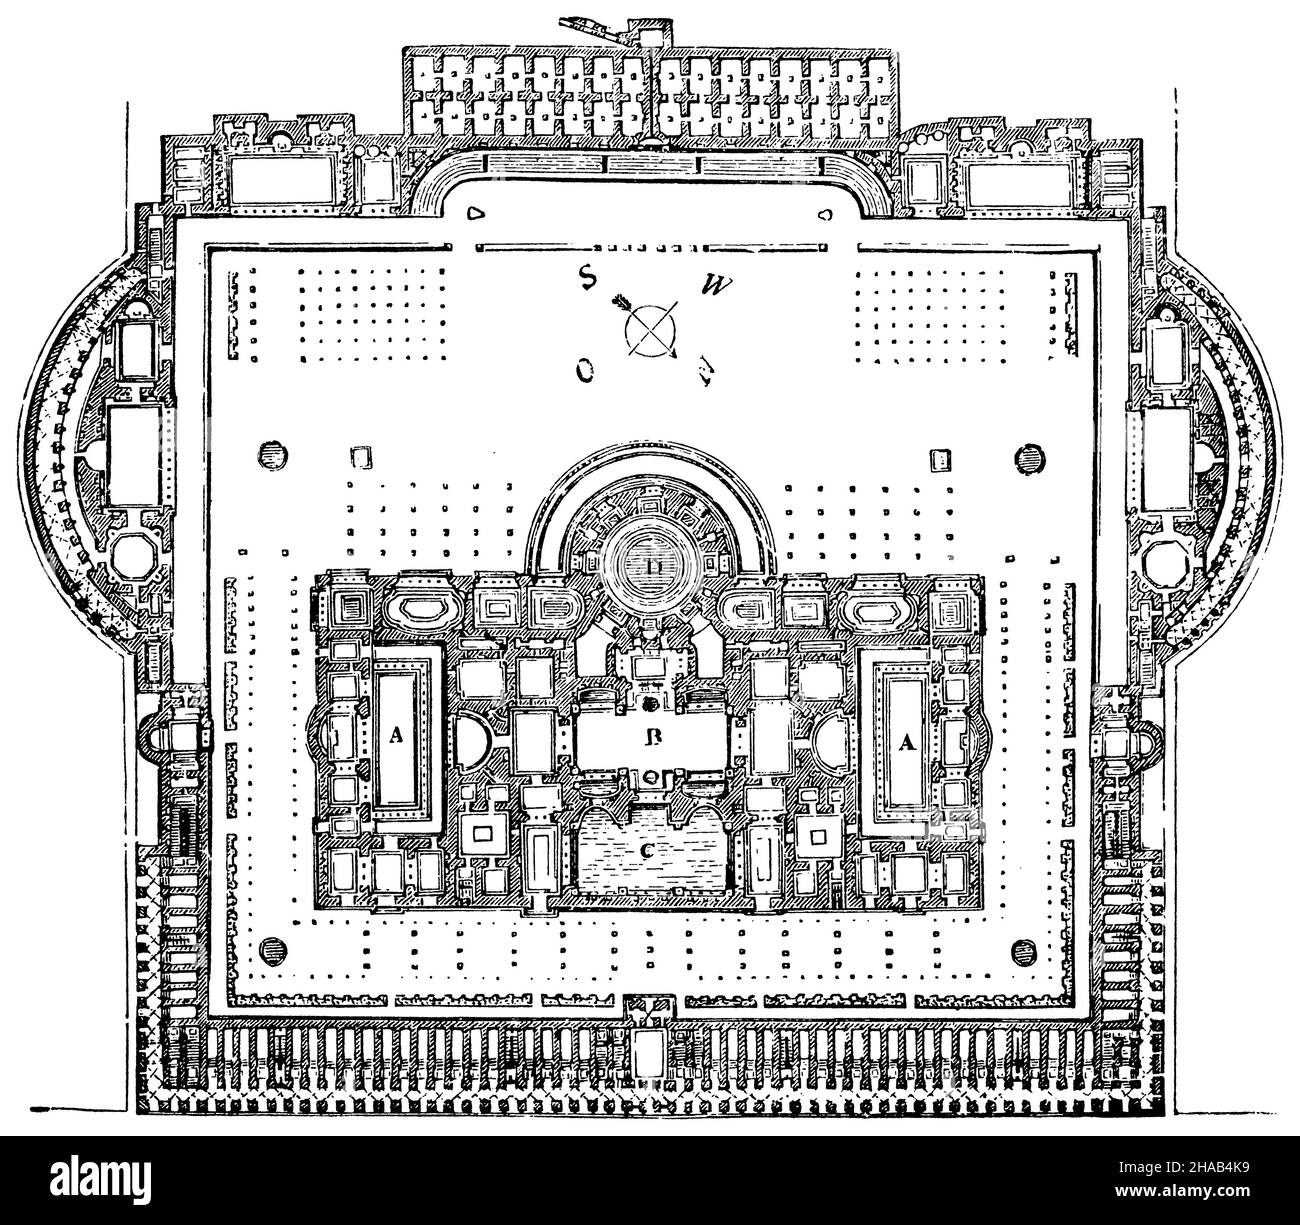 Baths of Caracalla in Rome, ground plan of the central building, ,  (cultural history book, 1892), Thermen des Caracalla zu Rom, Gnmdriss des Mittelbaues, Thermes de Caracalla à Rome, plan du bâtiment central Stock Photo